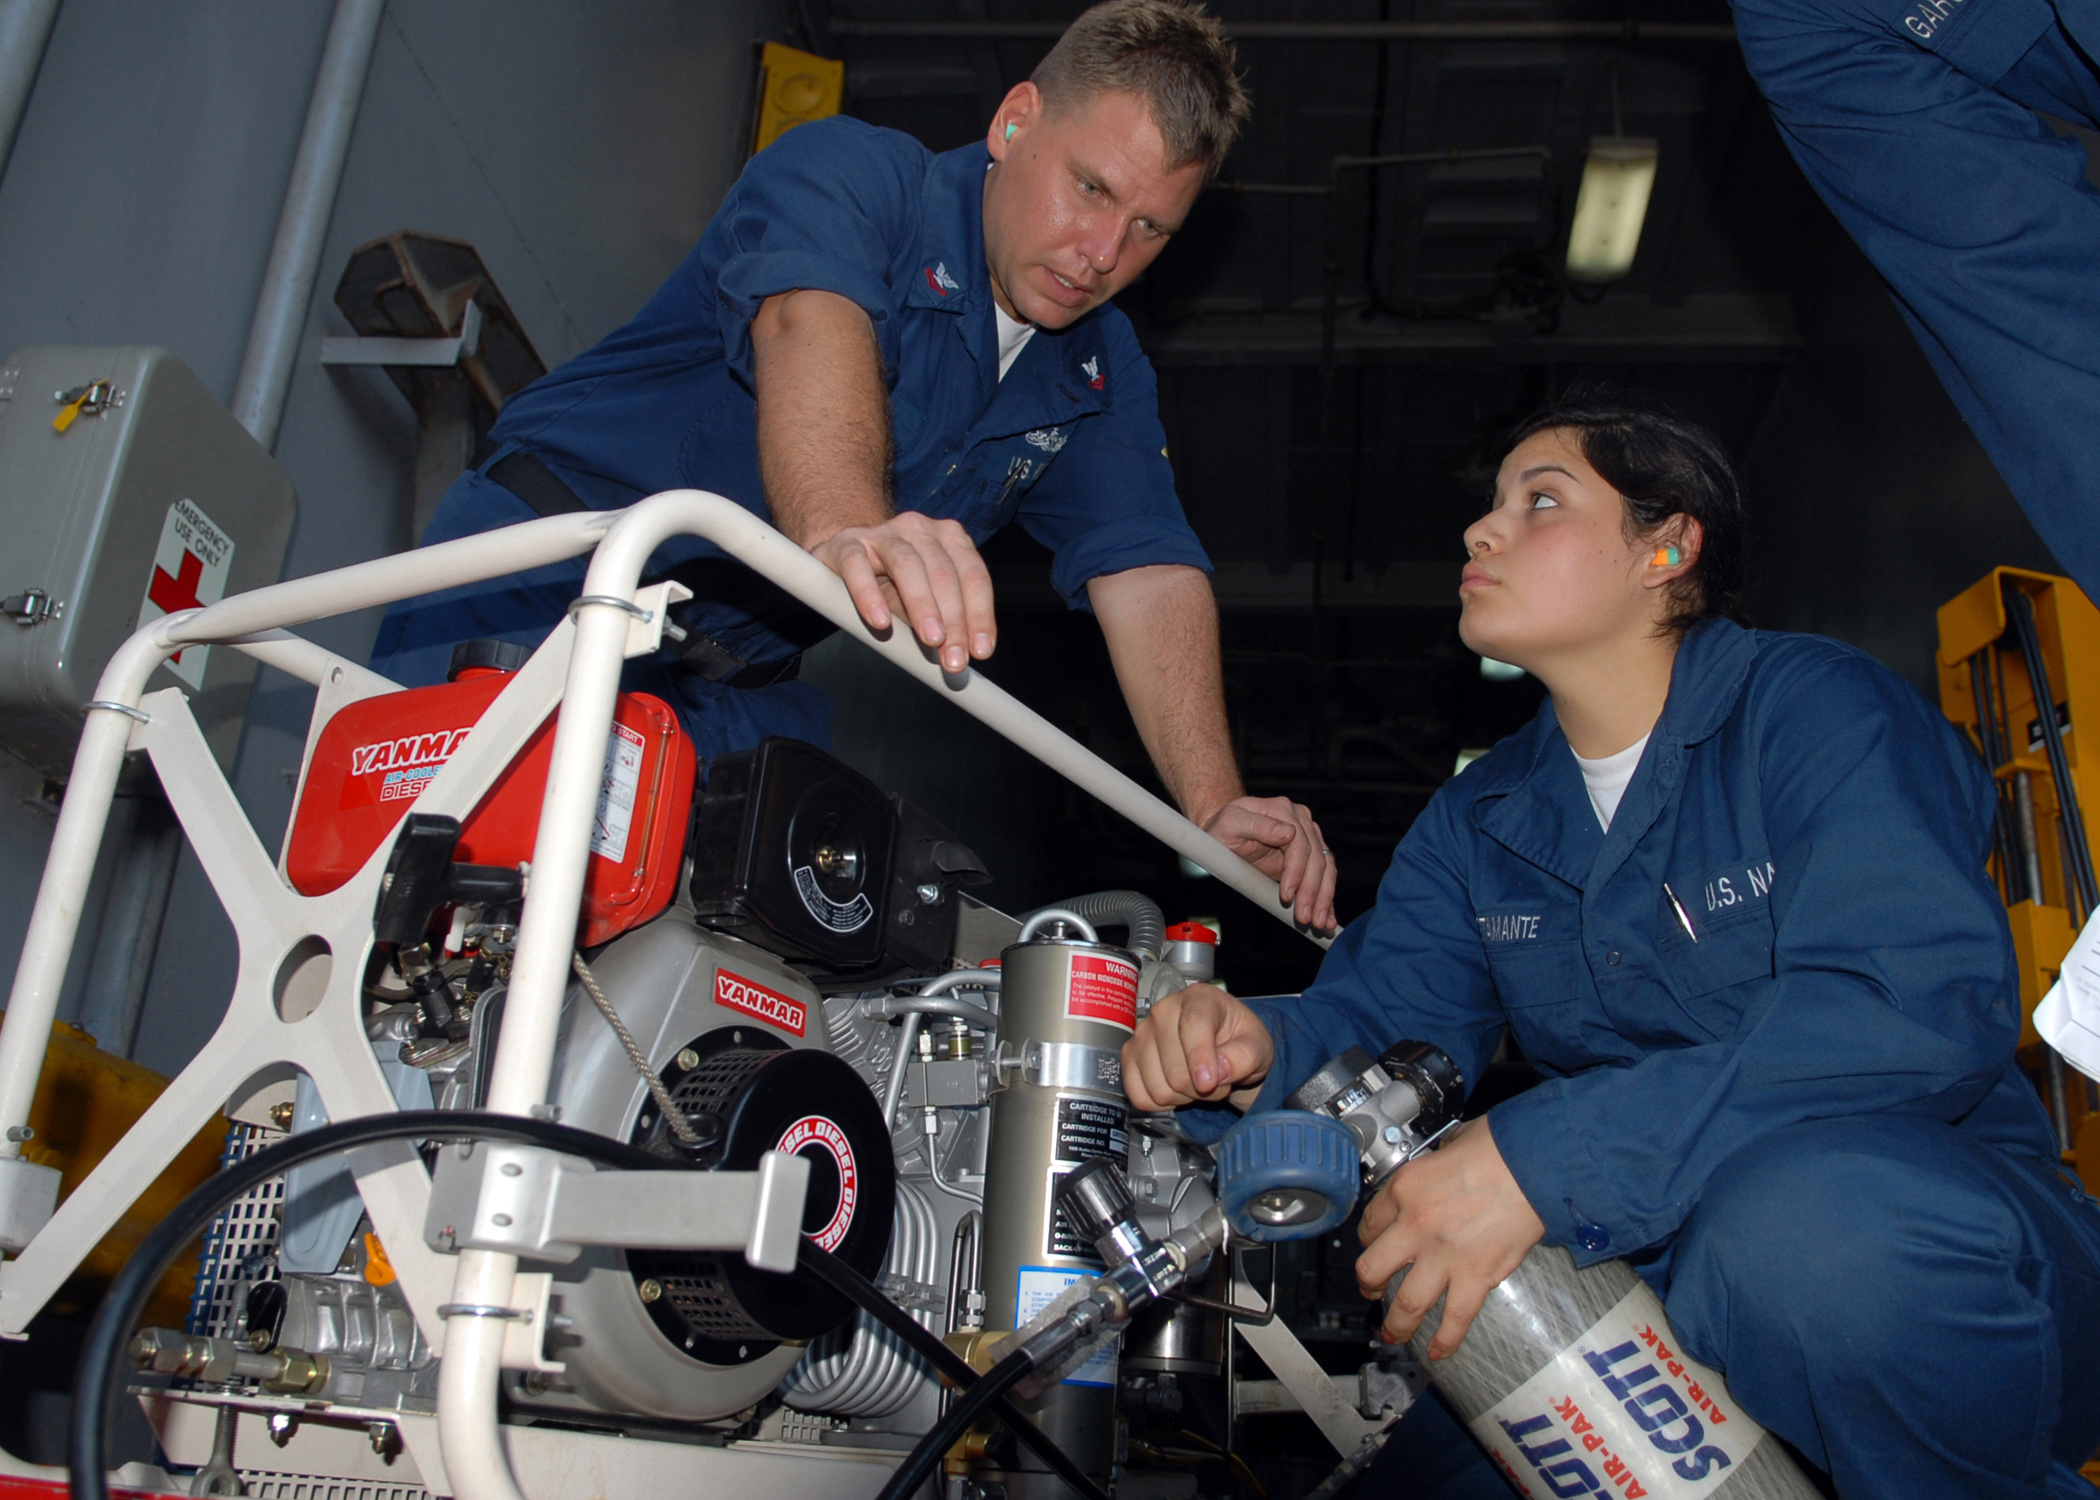 US Navy 100304-N-6692A-041 Damage Controlman 2nd Class Kevin L. Clark instructs Damage Controlman Fireman Recruit Marcela R. Bustamante on charging an oxygen bottle for self-contained breathing apparatus